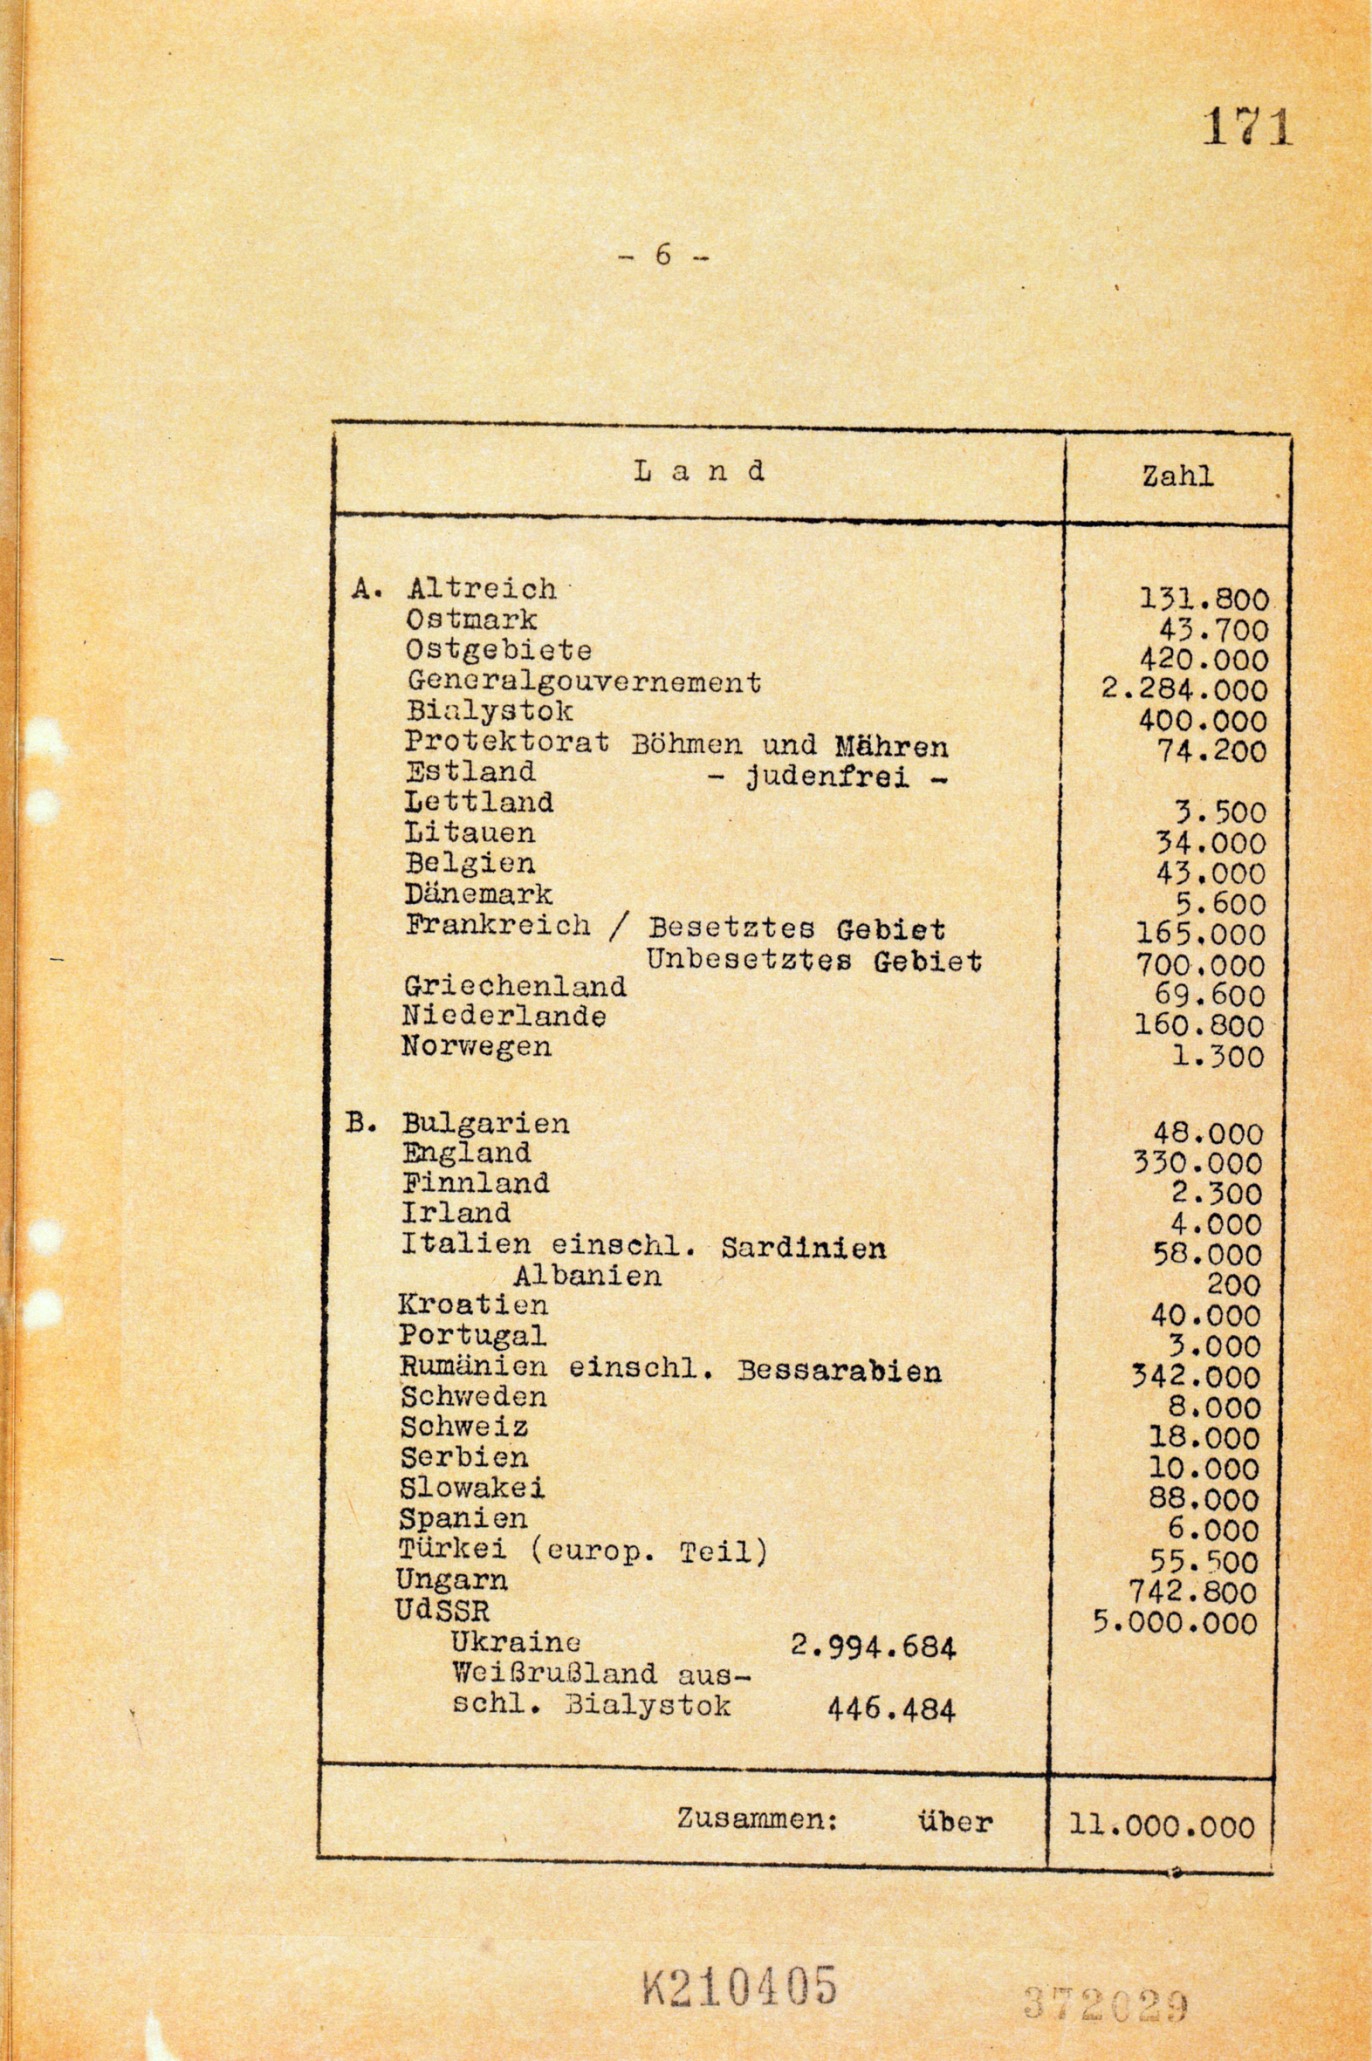 Statistics relating to the number of Jews in Europe written by Eichmann